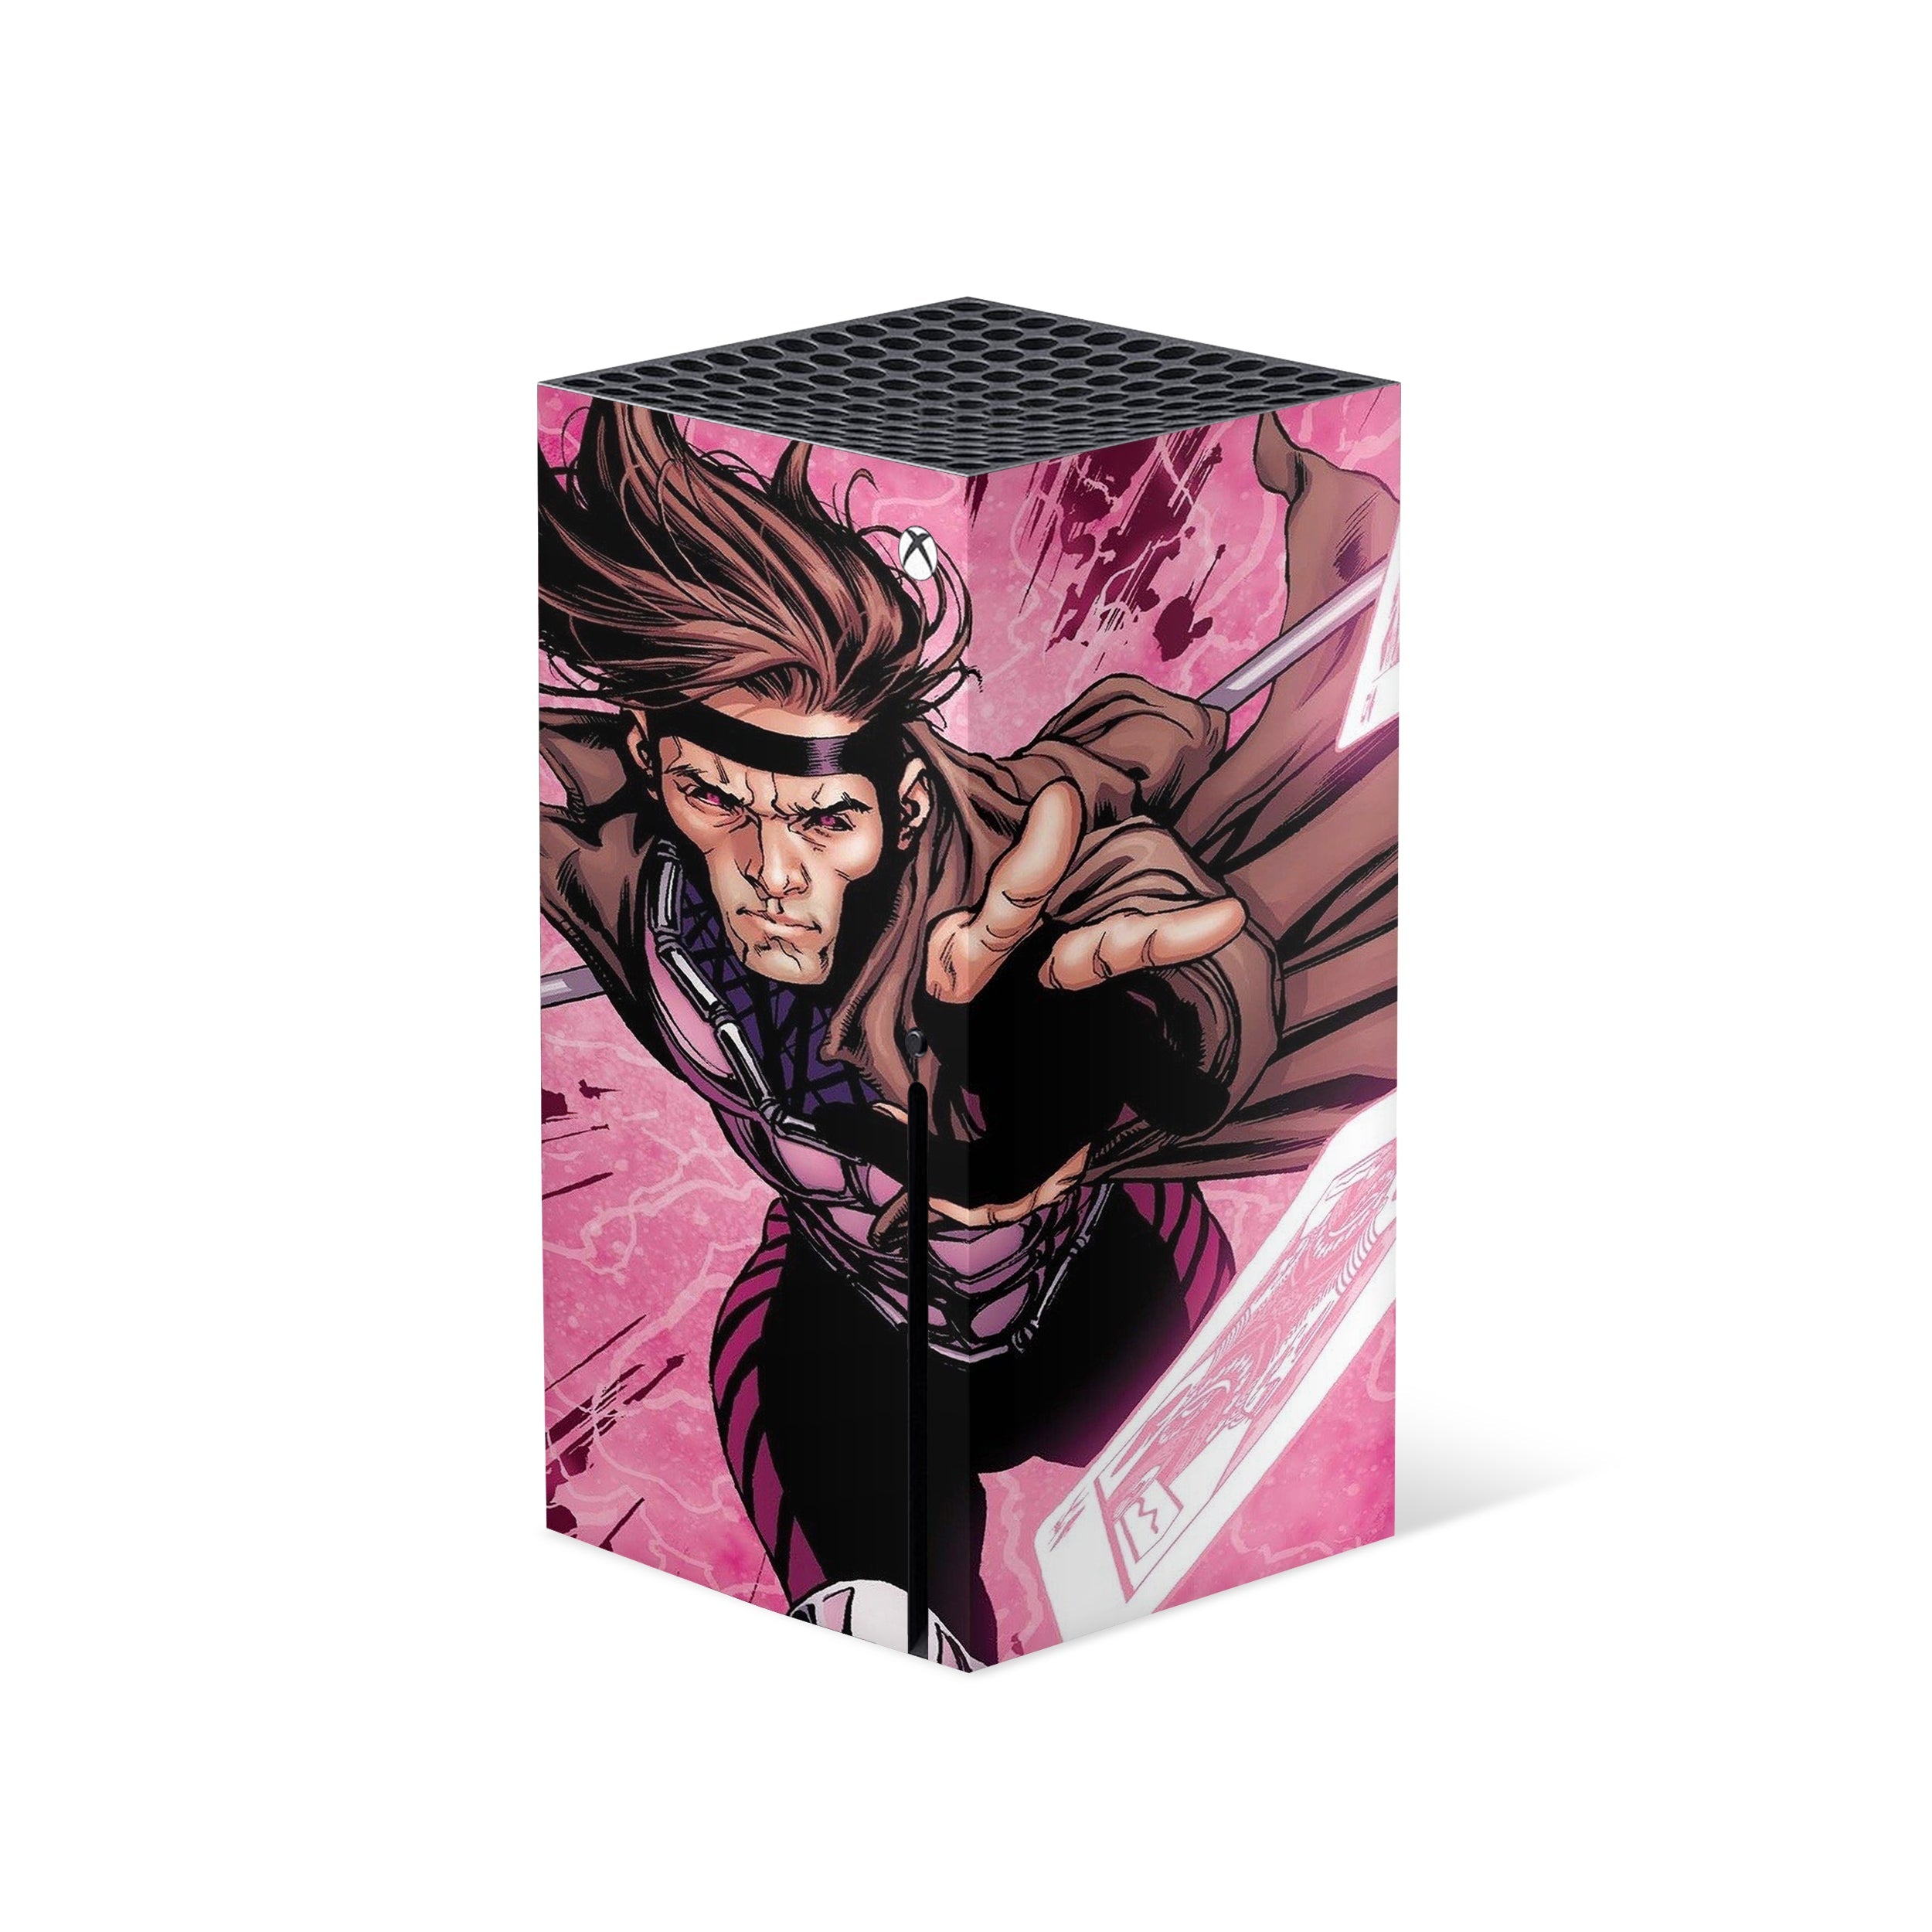 A video game skin featuring a Marvel Comics X Men Gambit design for the Xbox Series X.